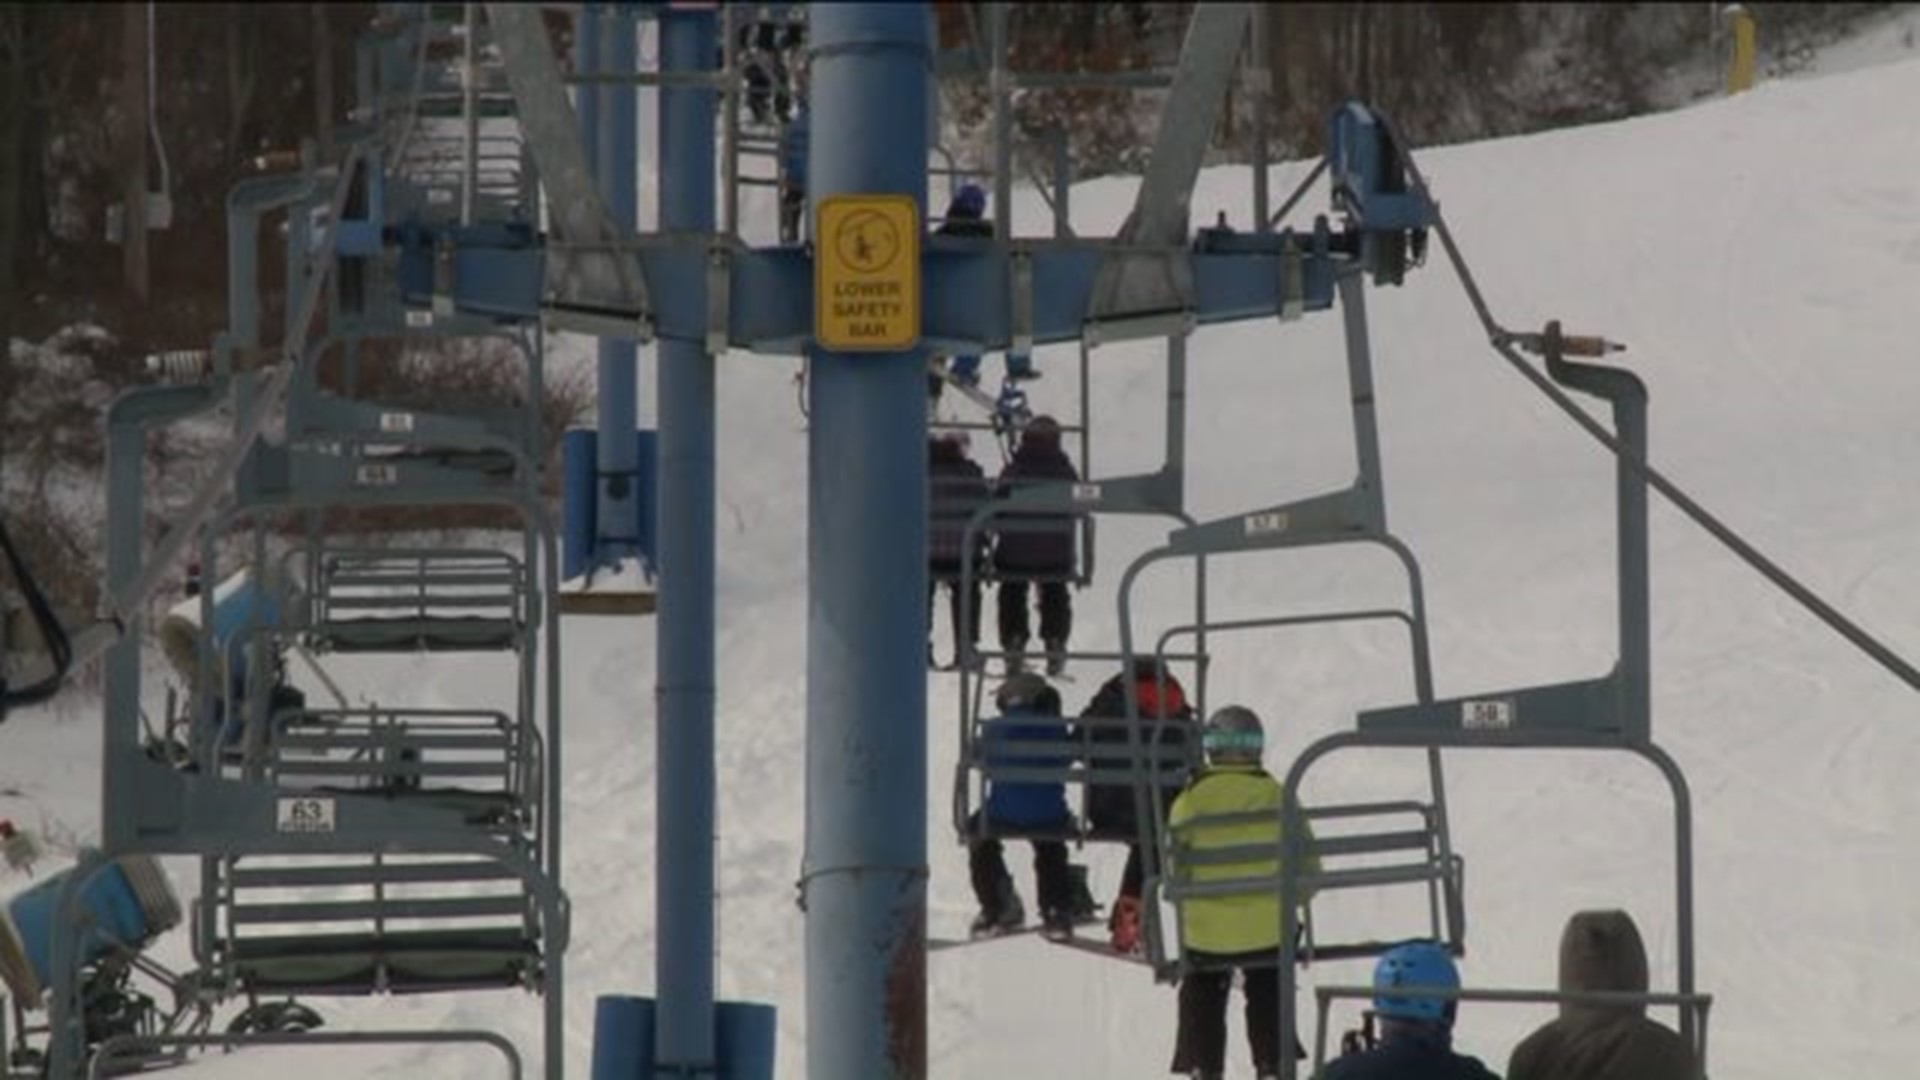 Snow days make good time for Connecticut ski areas